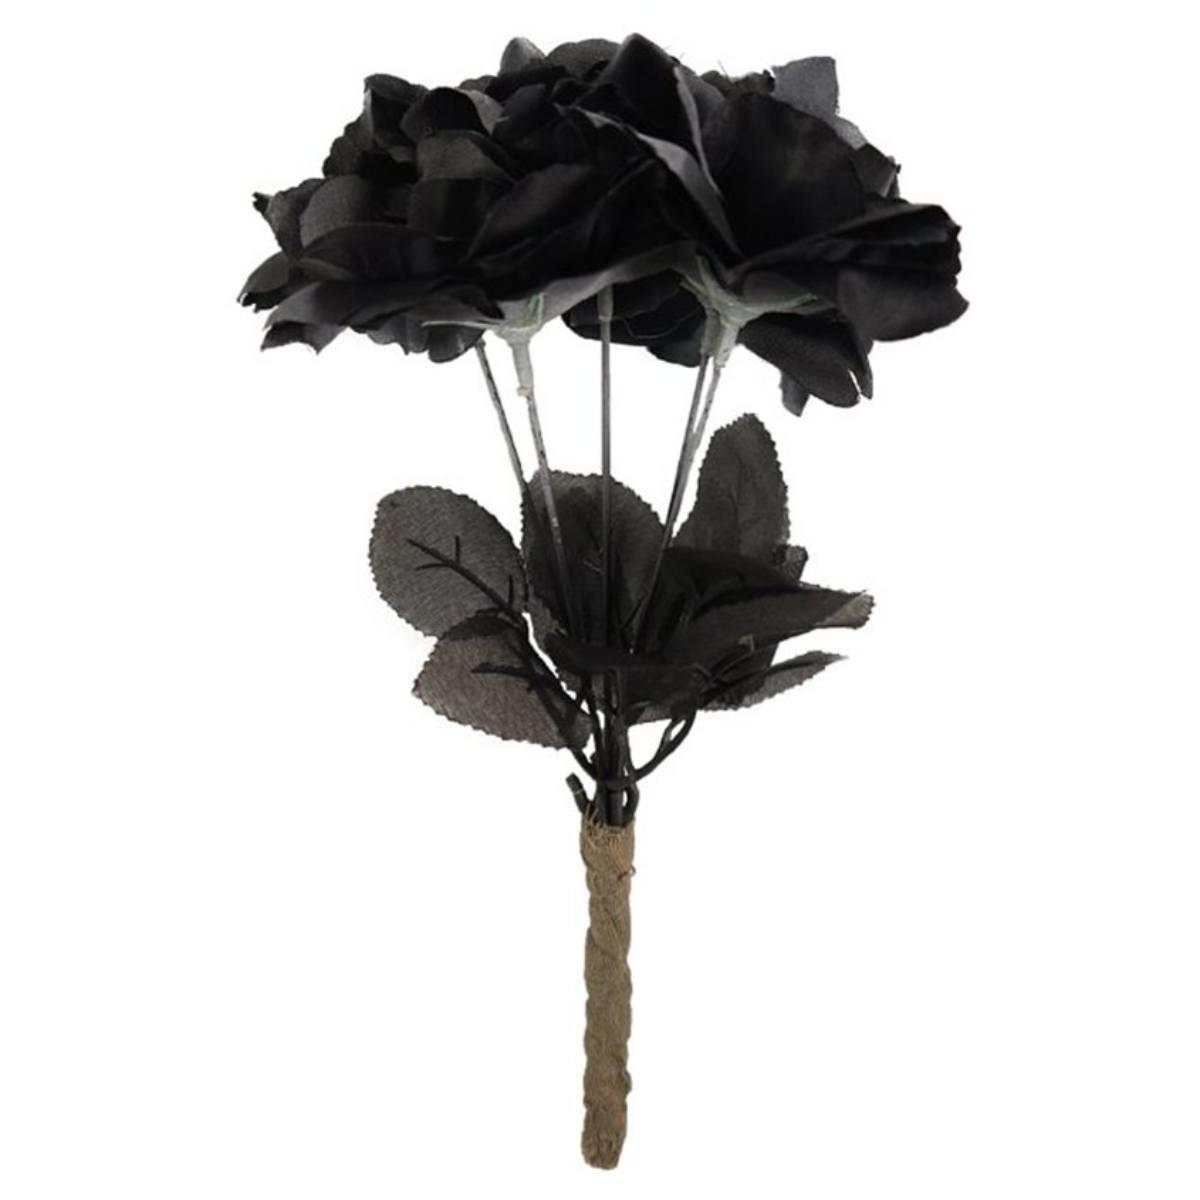 Multi-Stem Bouquet of Black Roses for Corpse Brides by Henbrandt V09945 available here at Karnival Costumes online party shop